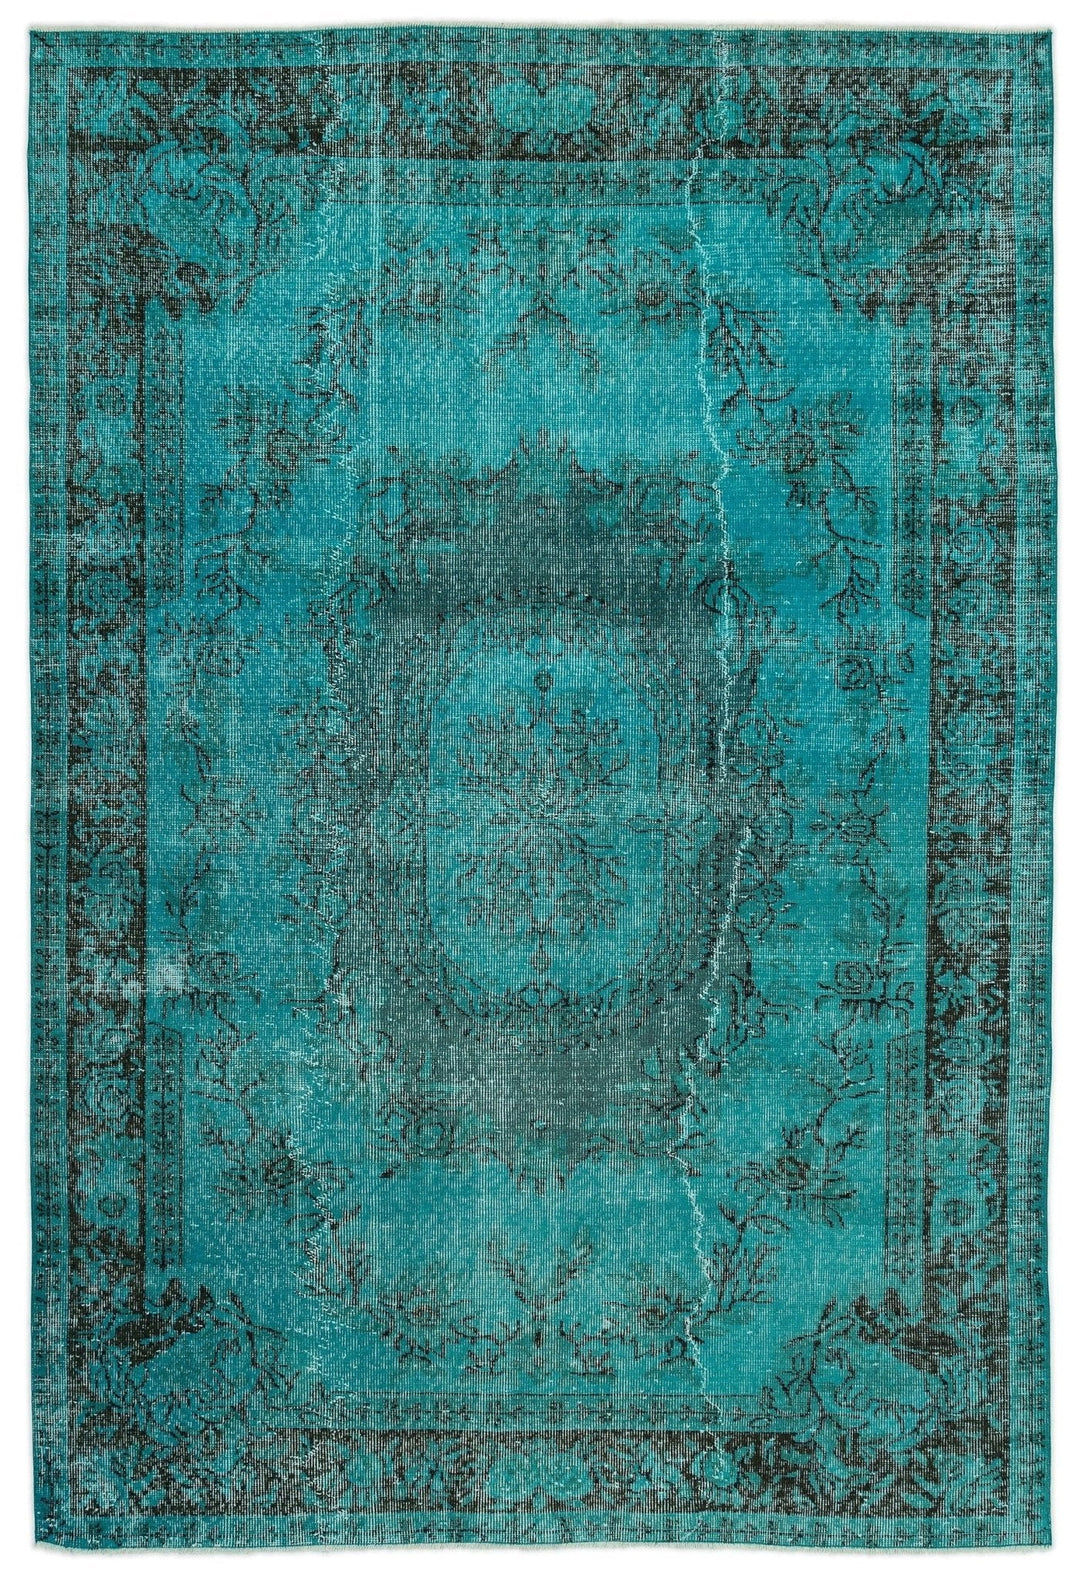 Athens 14983 Turquoise Tumbled Wool Hand Woven Carpet 178 x 265